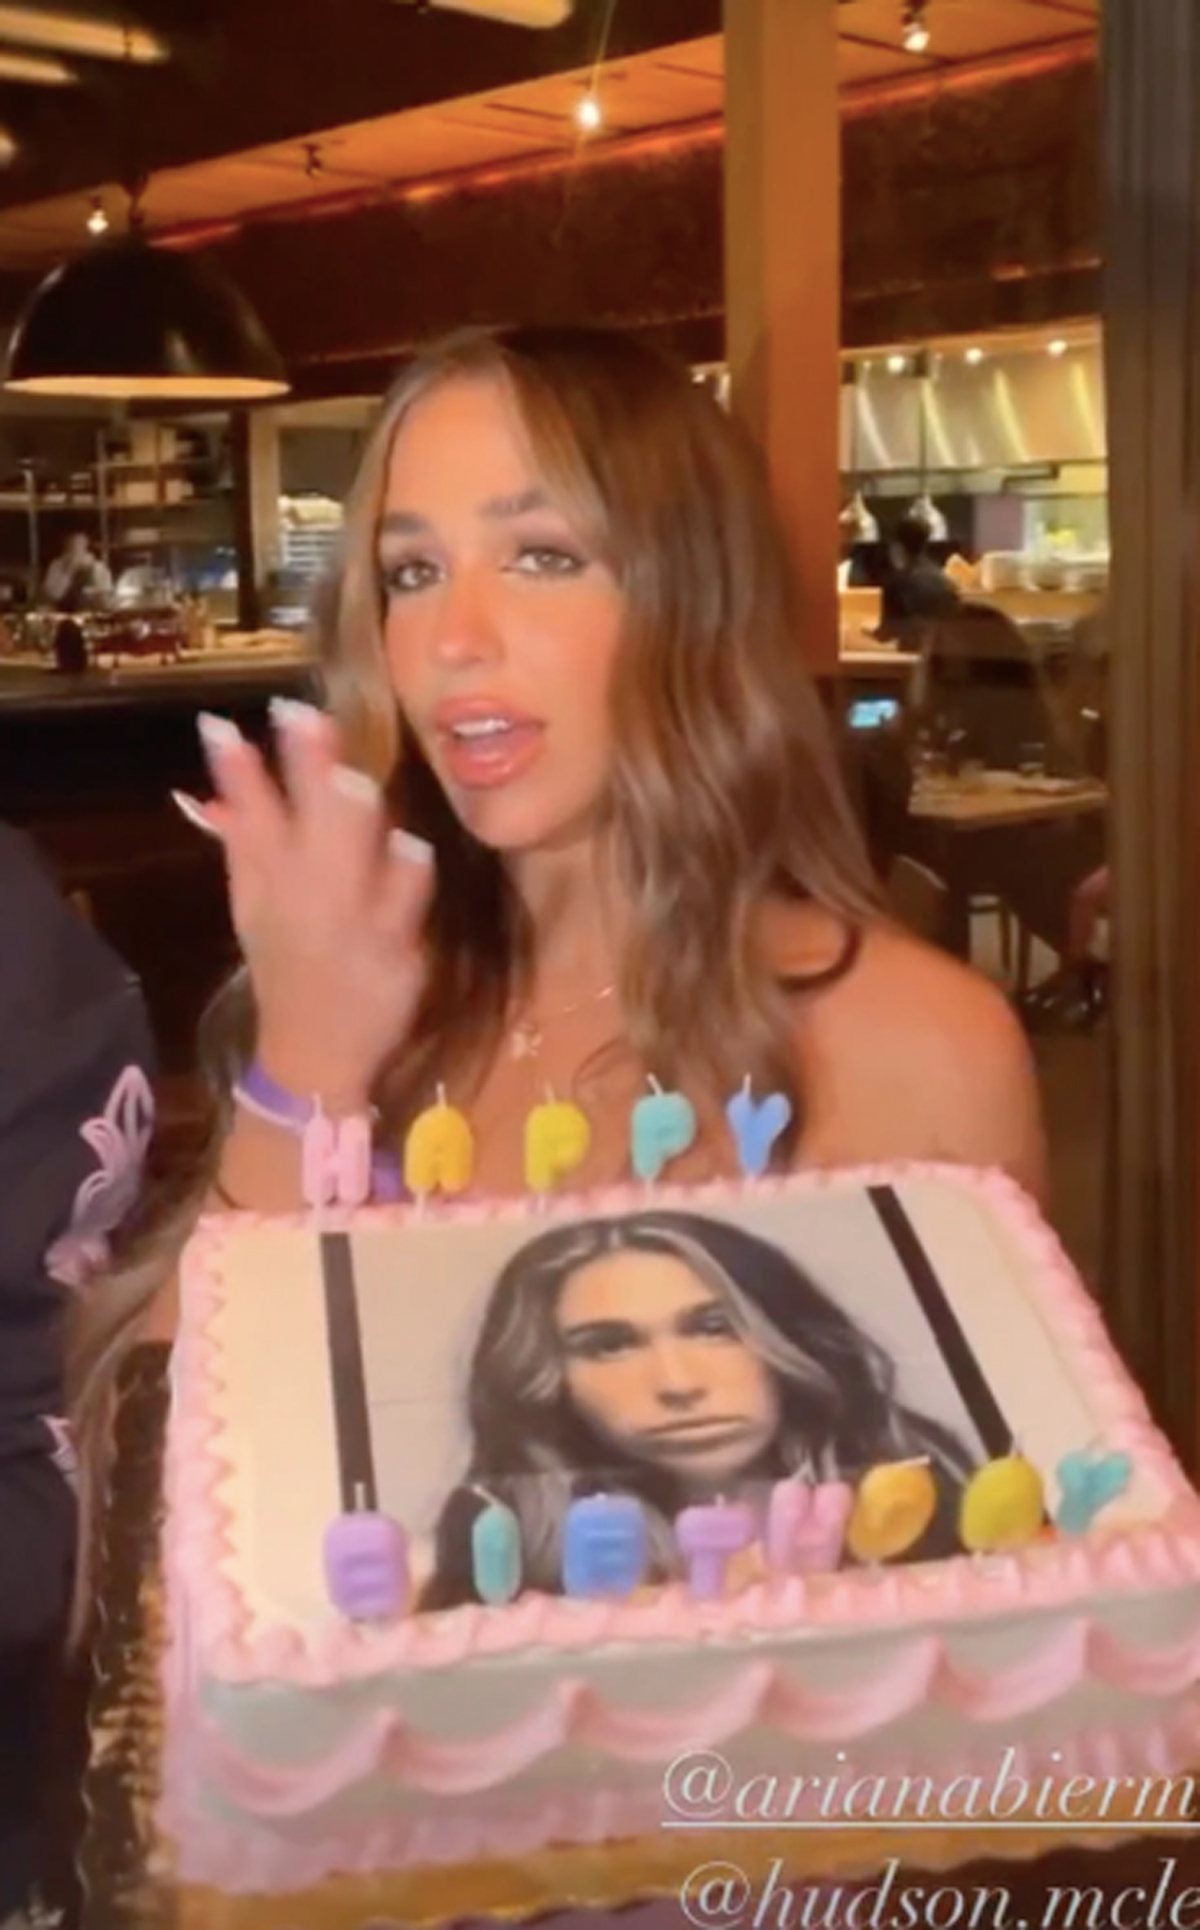 OMG! Ariana Biermann Celebrated Her 21st Birthday With A Cake Decorated With Her DUI Mugshot! 